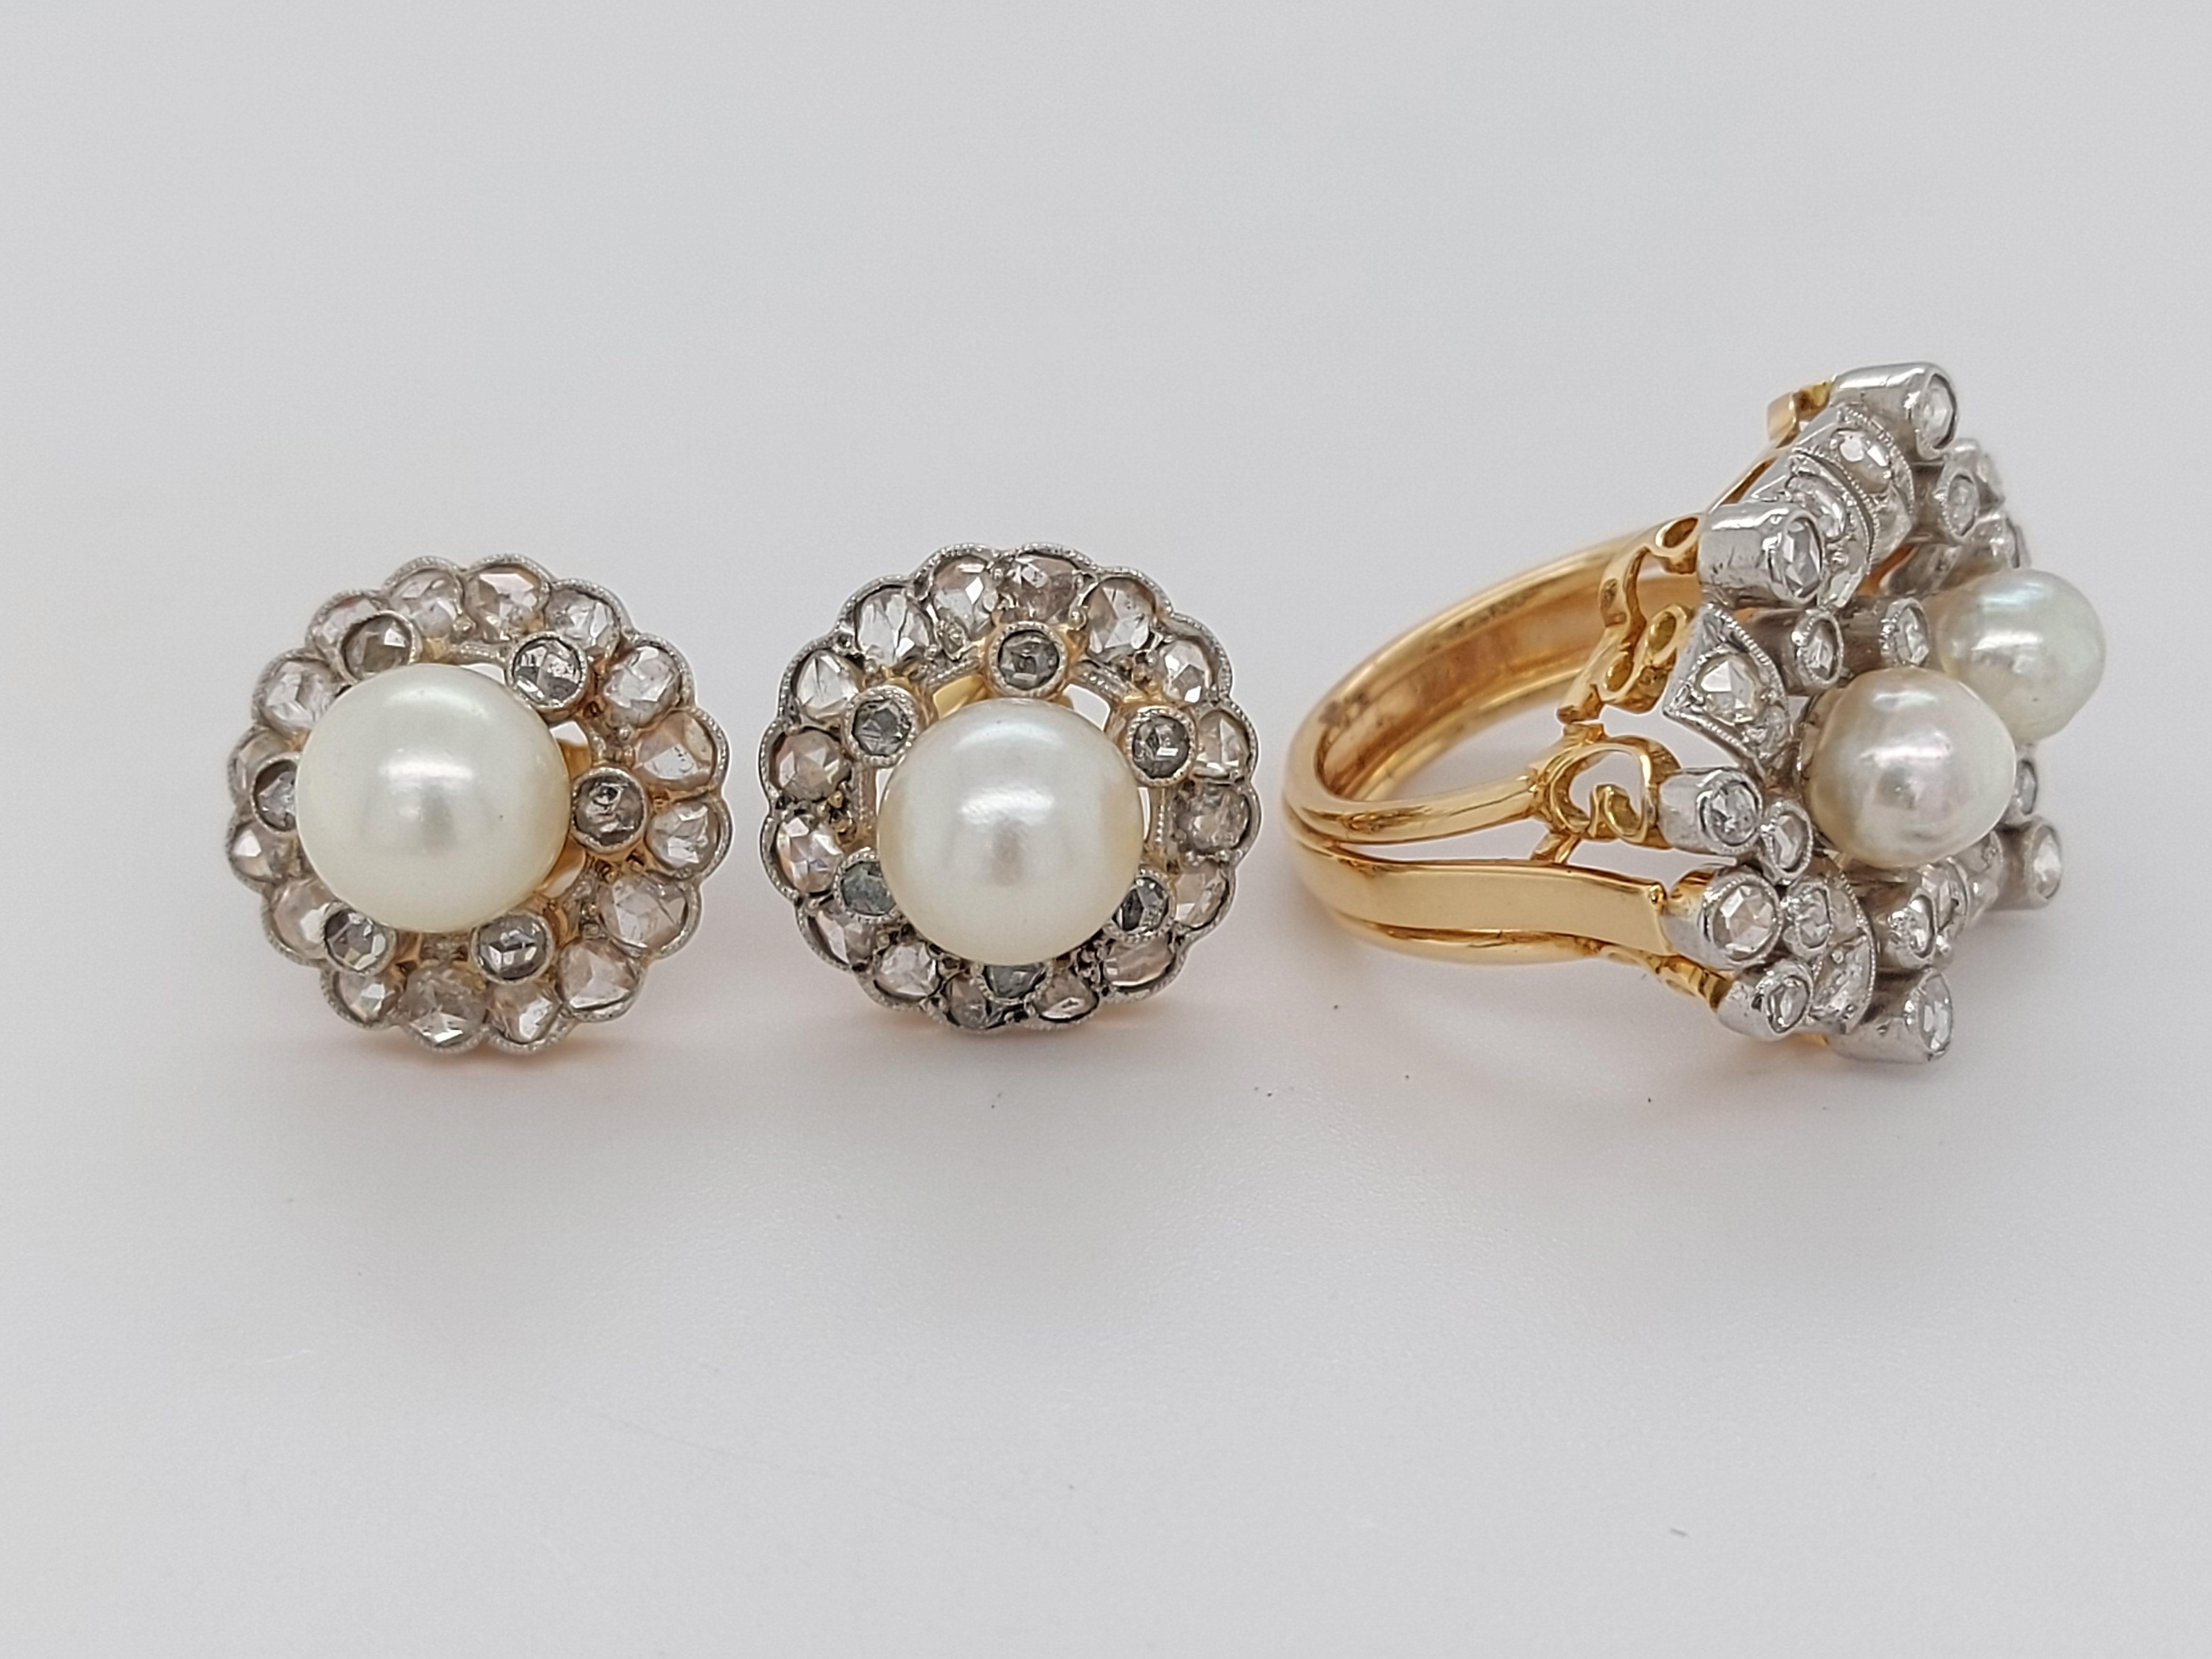 Artisan Beautiful Platinum and Gold Ring and Earrings Rose Cut Diamonds and Pearls For Sale